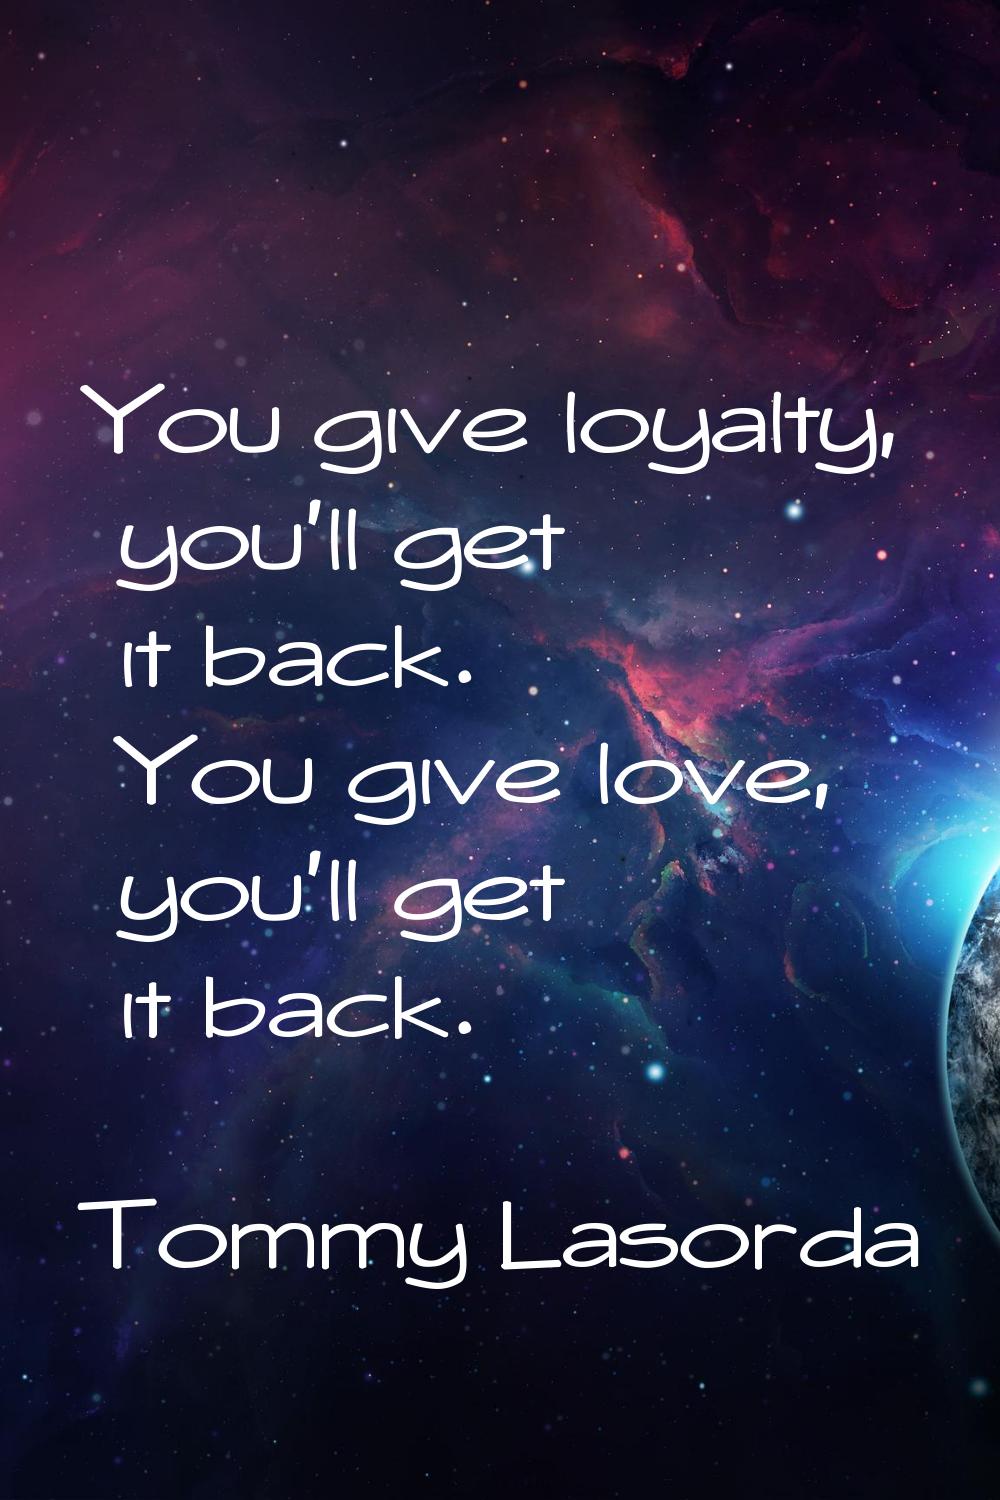 You give loyalty, you'll get it back. You give love, you'll get it back.